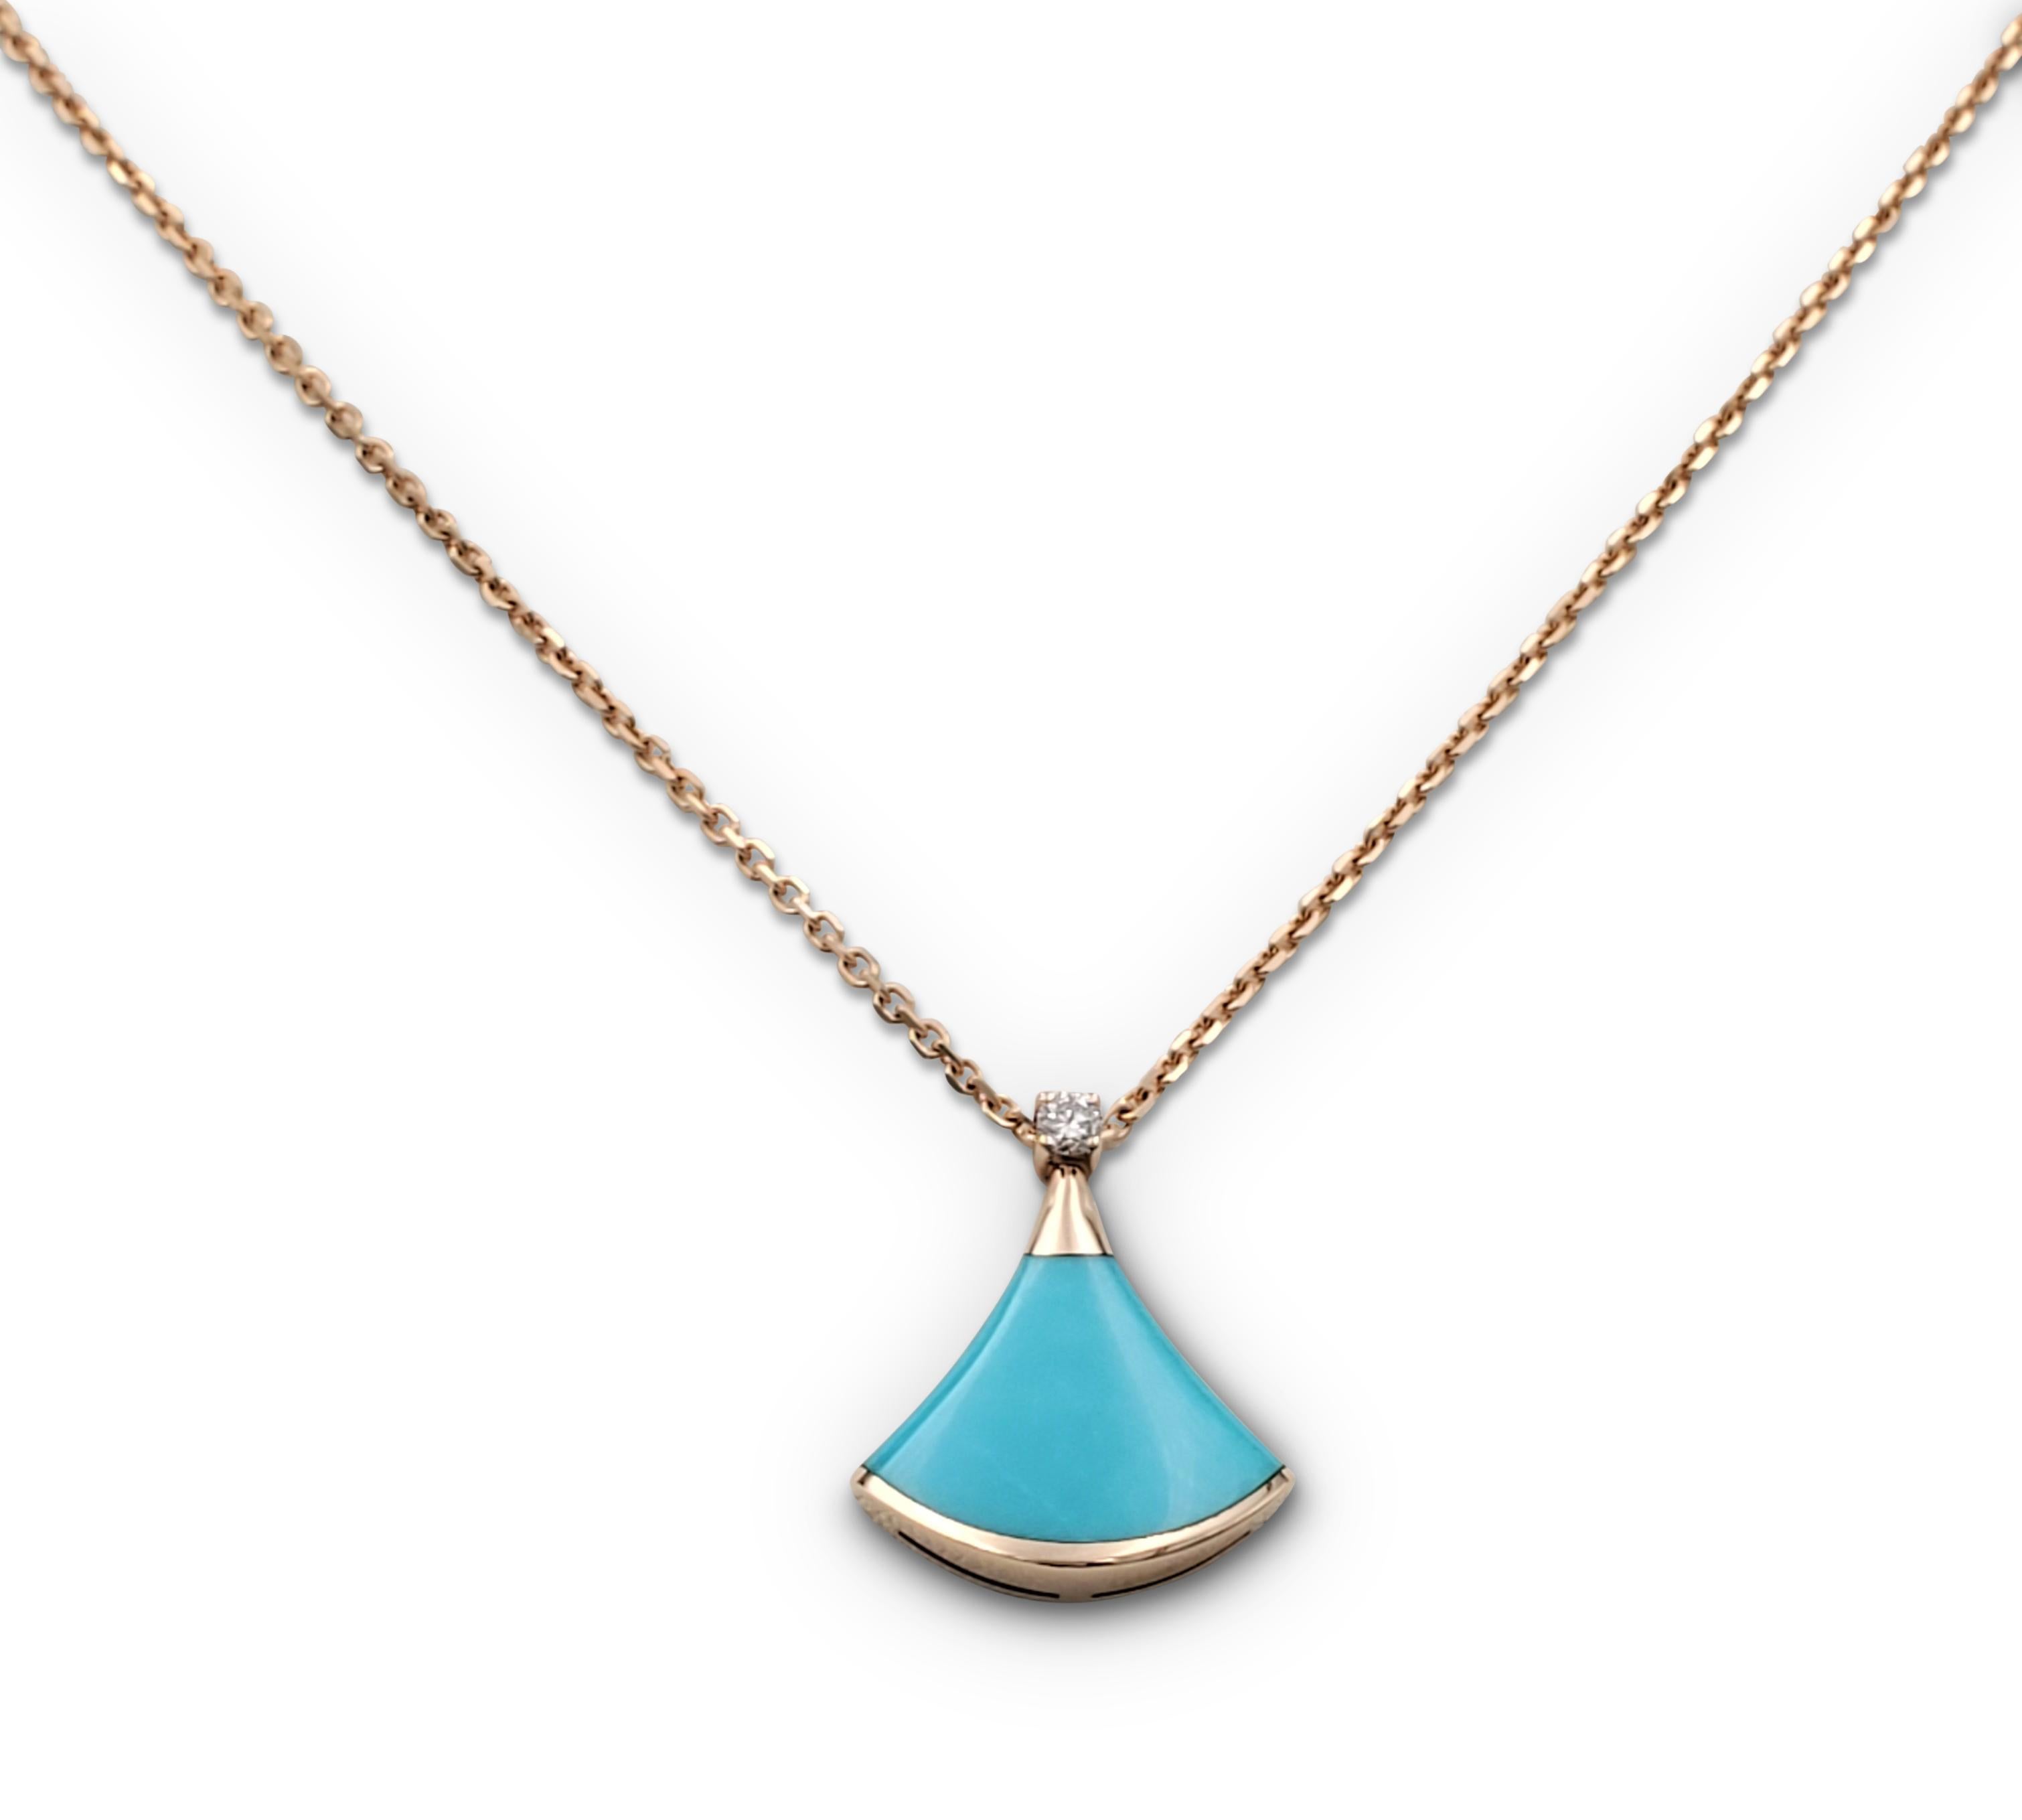 Authentic Bulgari necklace crafted in 18 karat rose gold featuring a fan-shaped turquoise pendant, set with 1 round brilliant diamond weighing approximately .04ct.  The chain measures 17 inches in total length and is worn at an 8 inch drop.  Pendant